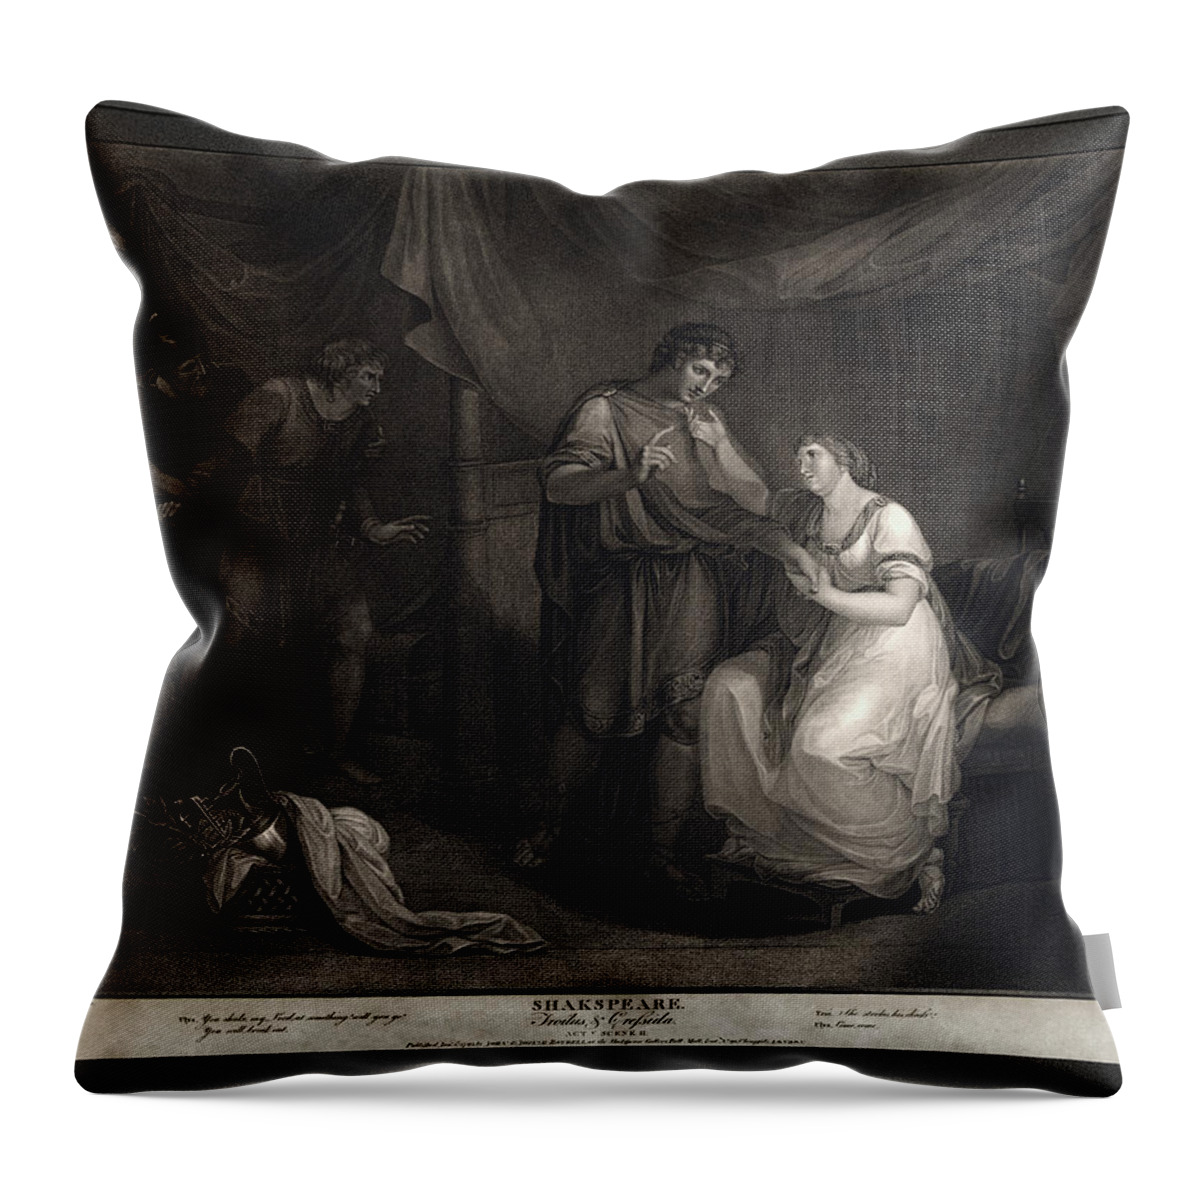 A Scene From Troilus And Cressid Throw Pillow featuring the painting A Scene from Troilus and Cressid by Angelika Kauffmann and engraver Luigi Schiavonetti by Rolando Burbon